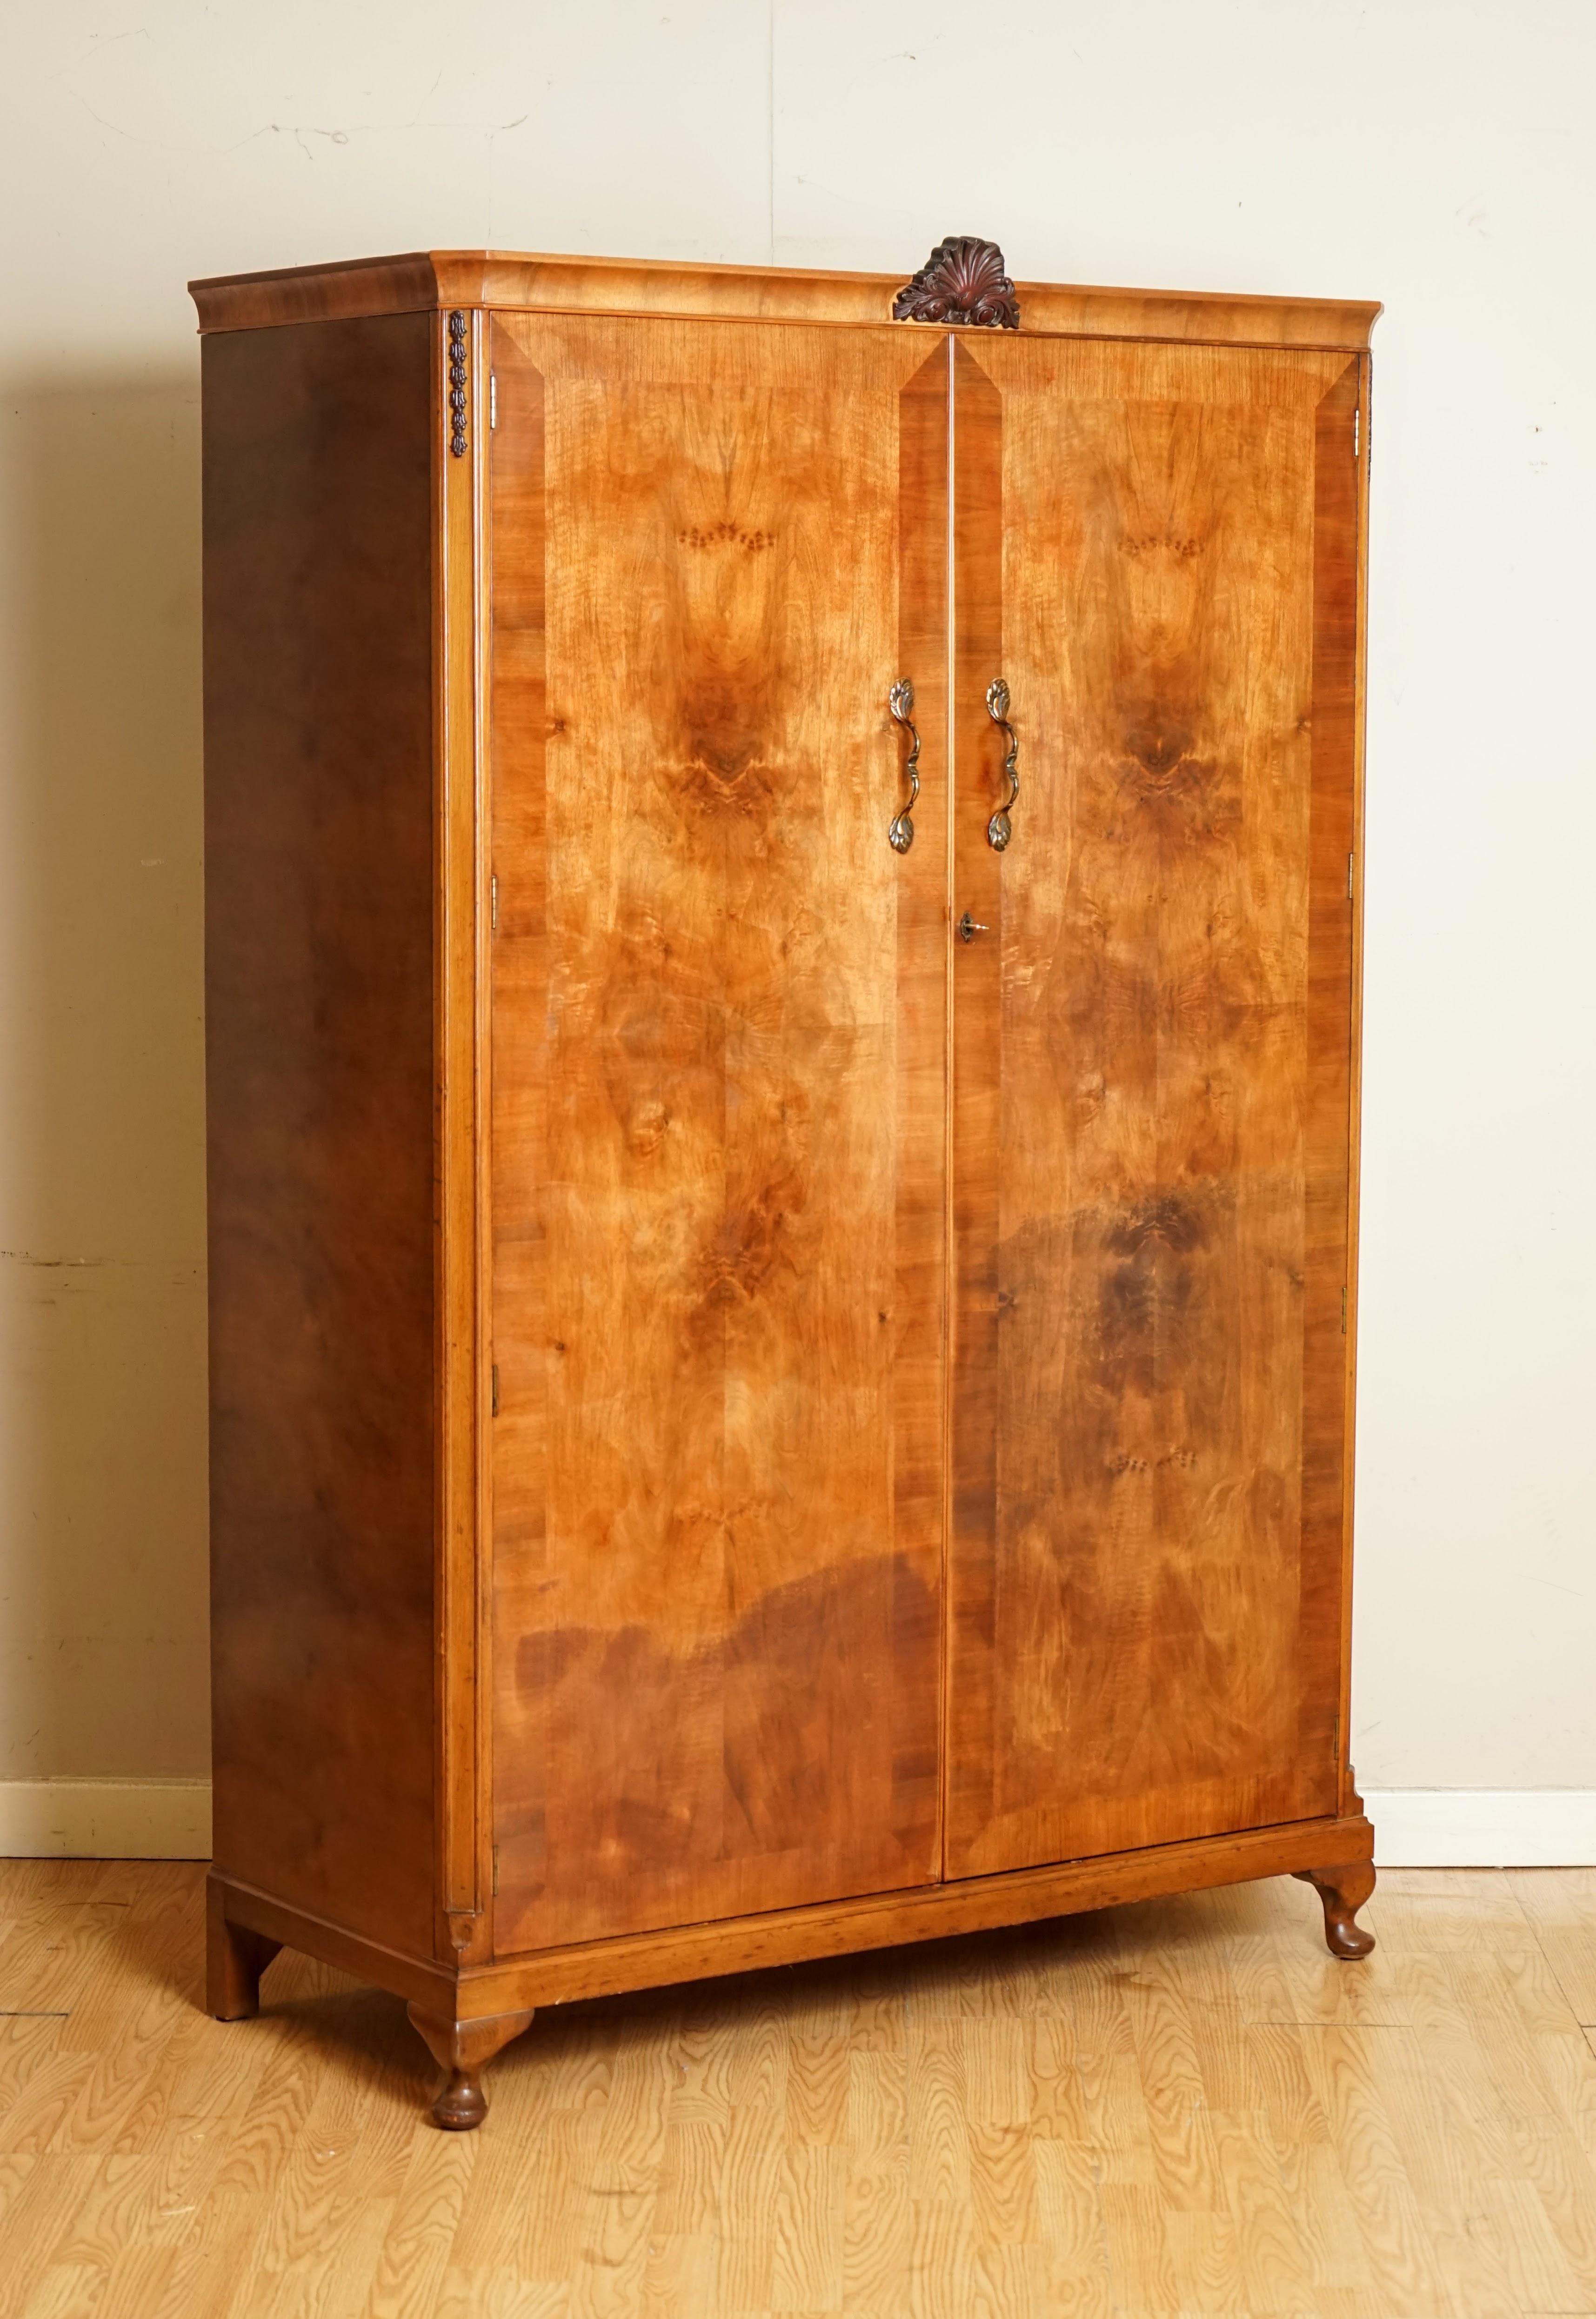 We are so excited to present to you this Beautiful Art Deco Burr Walnut Wardrobe.

A lovely and decorative wardrobe, it has some fading on the from as you will be able to see on the pictures, apart from that, it's in a very good condition.